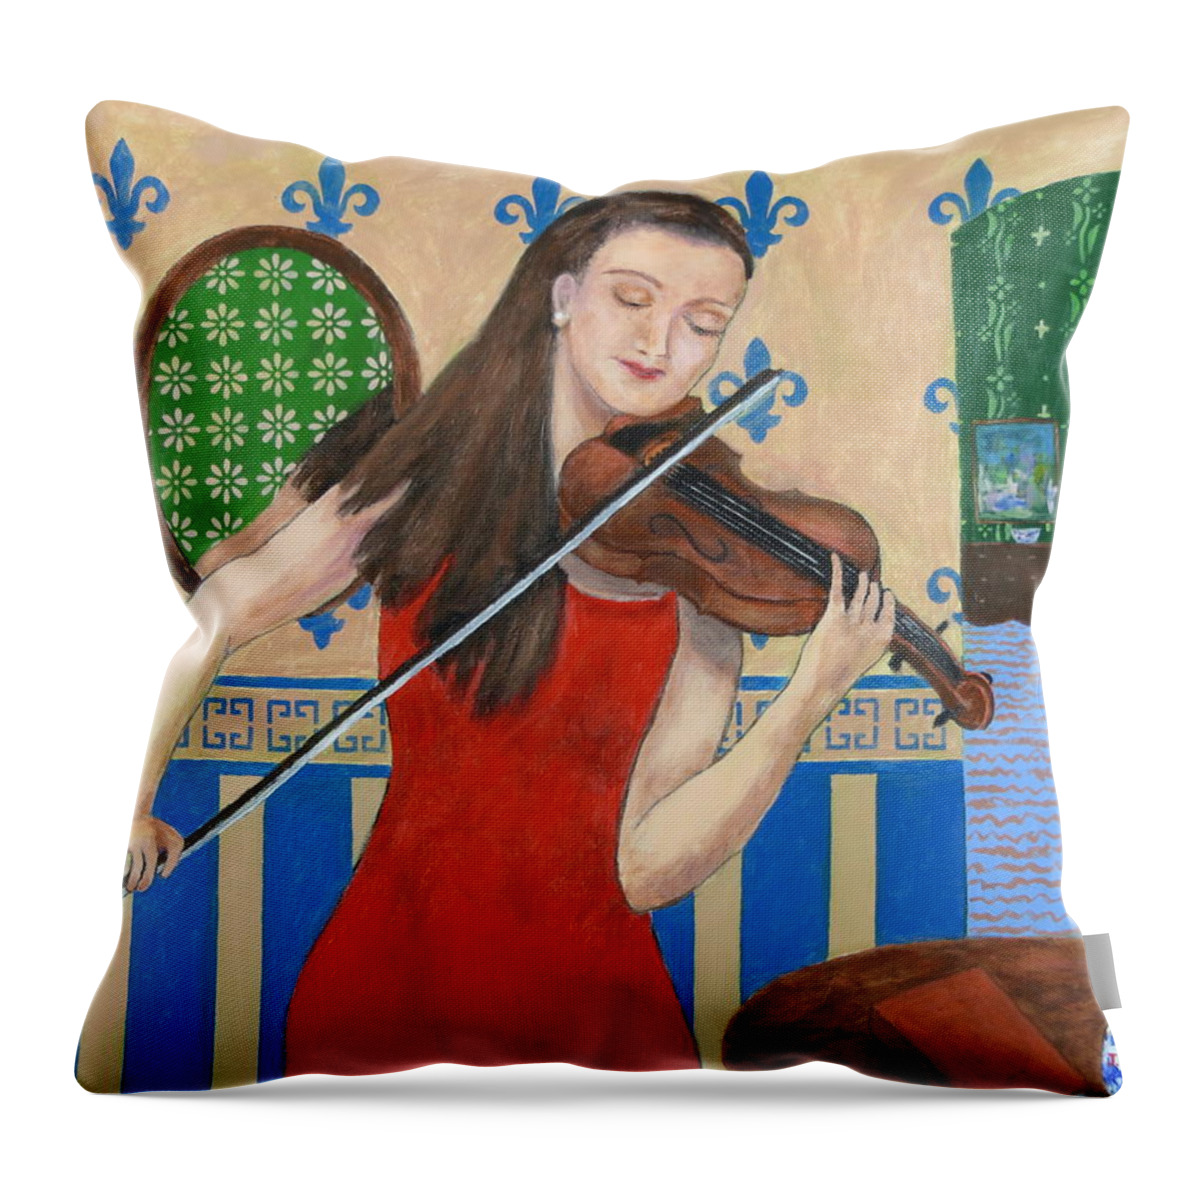 Woman Violinist Throw Pillow featuring the painting The Violinist by J Loren Reedy